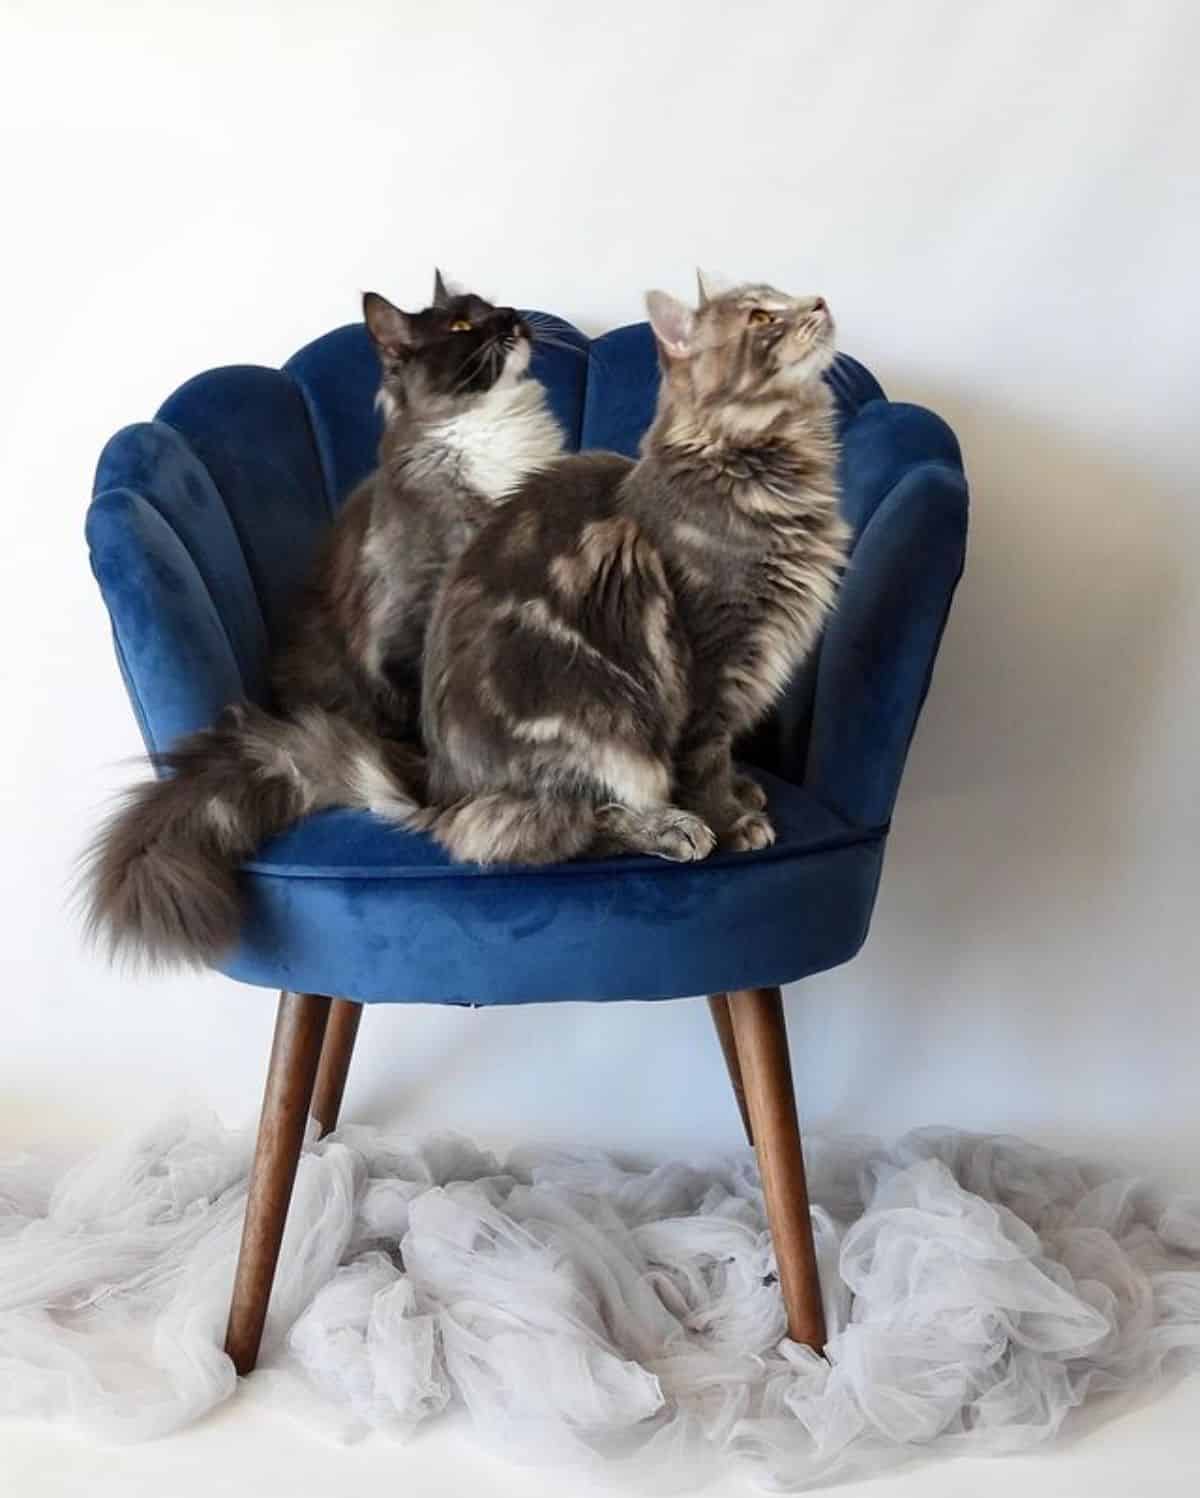 Two fluffy tabby maine coons sitting on a blue chair.